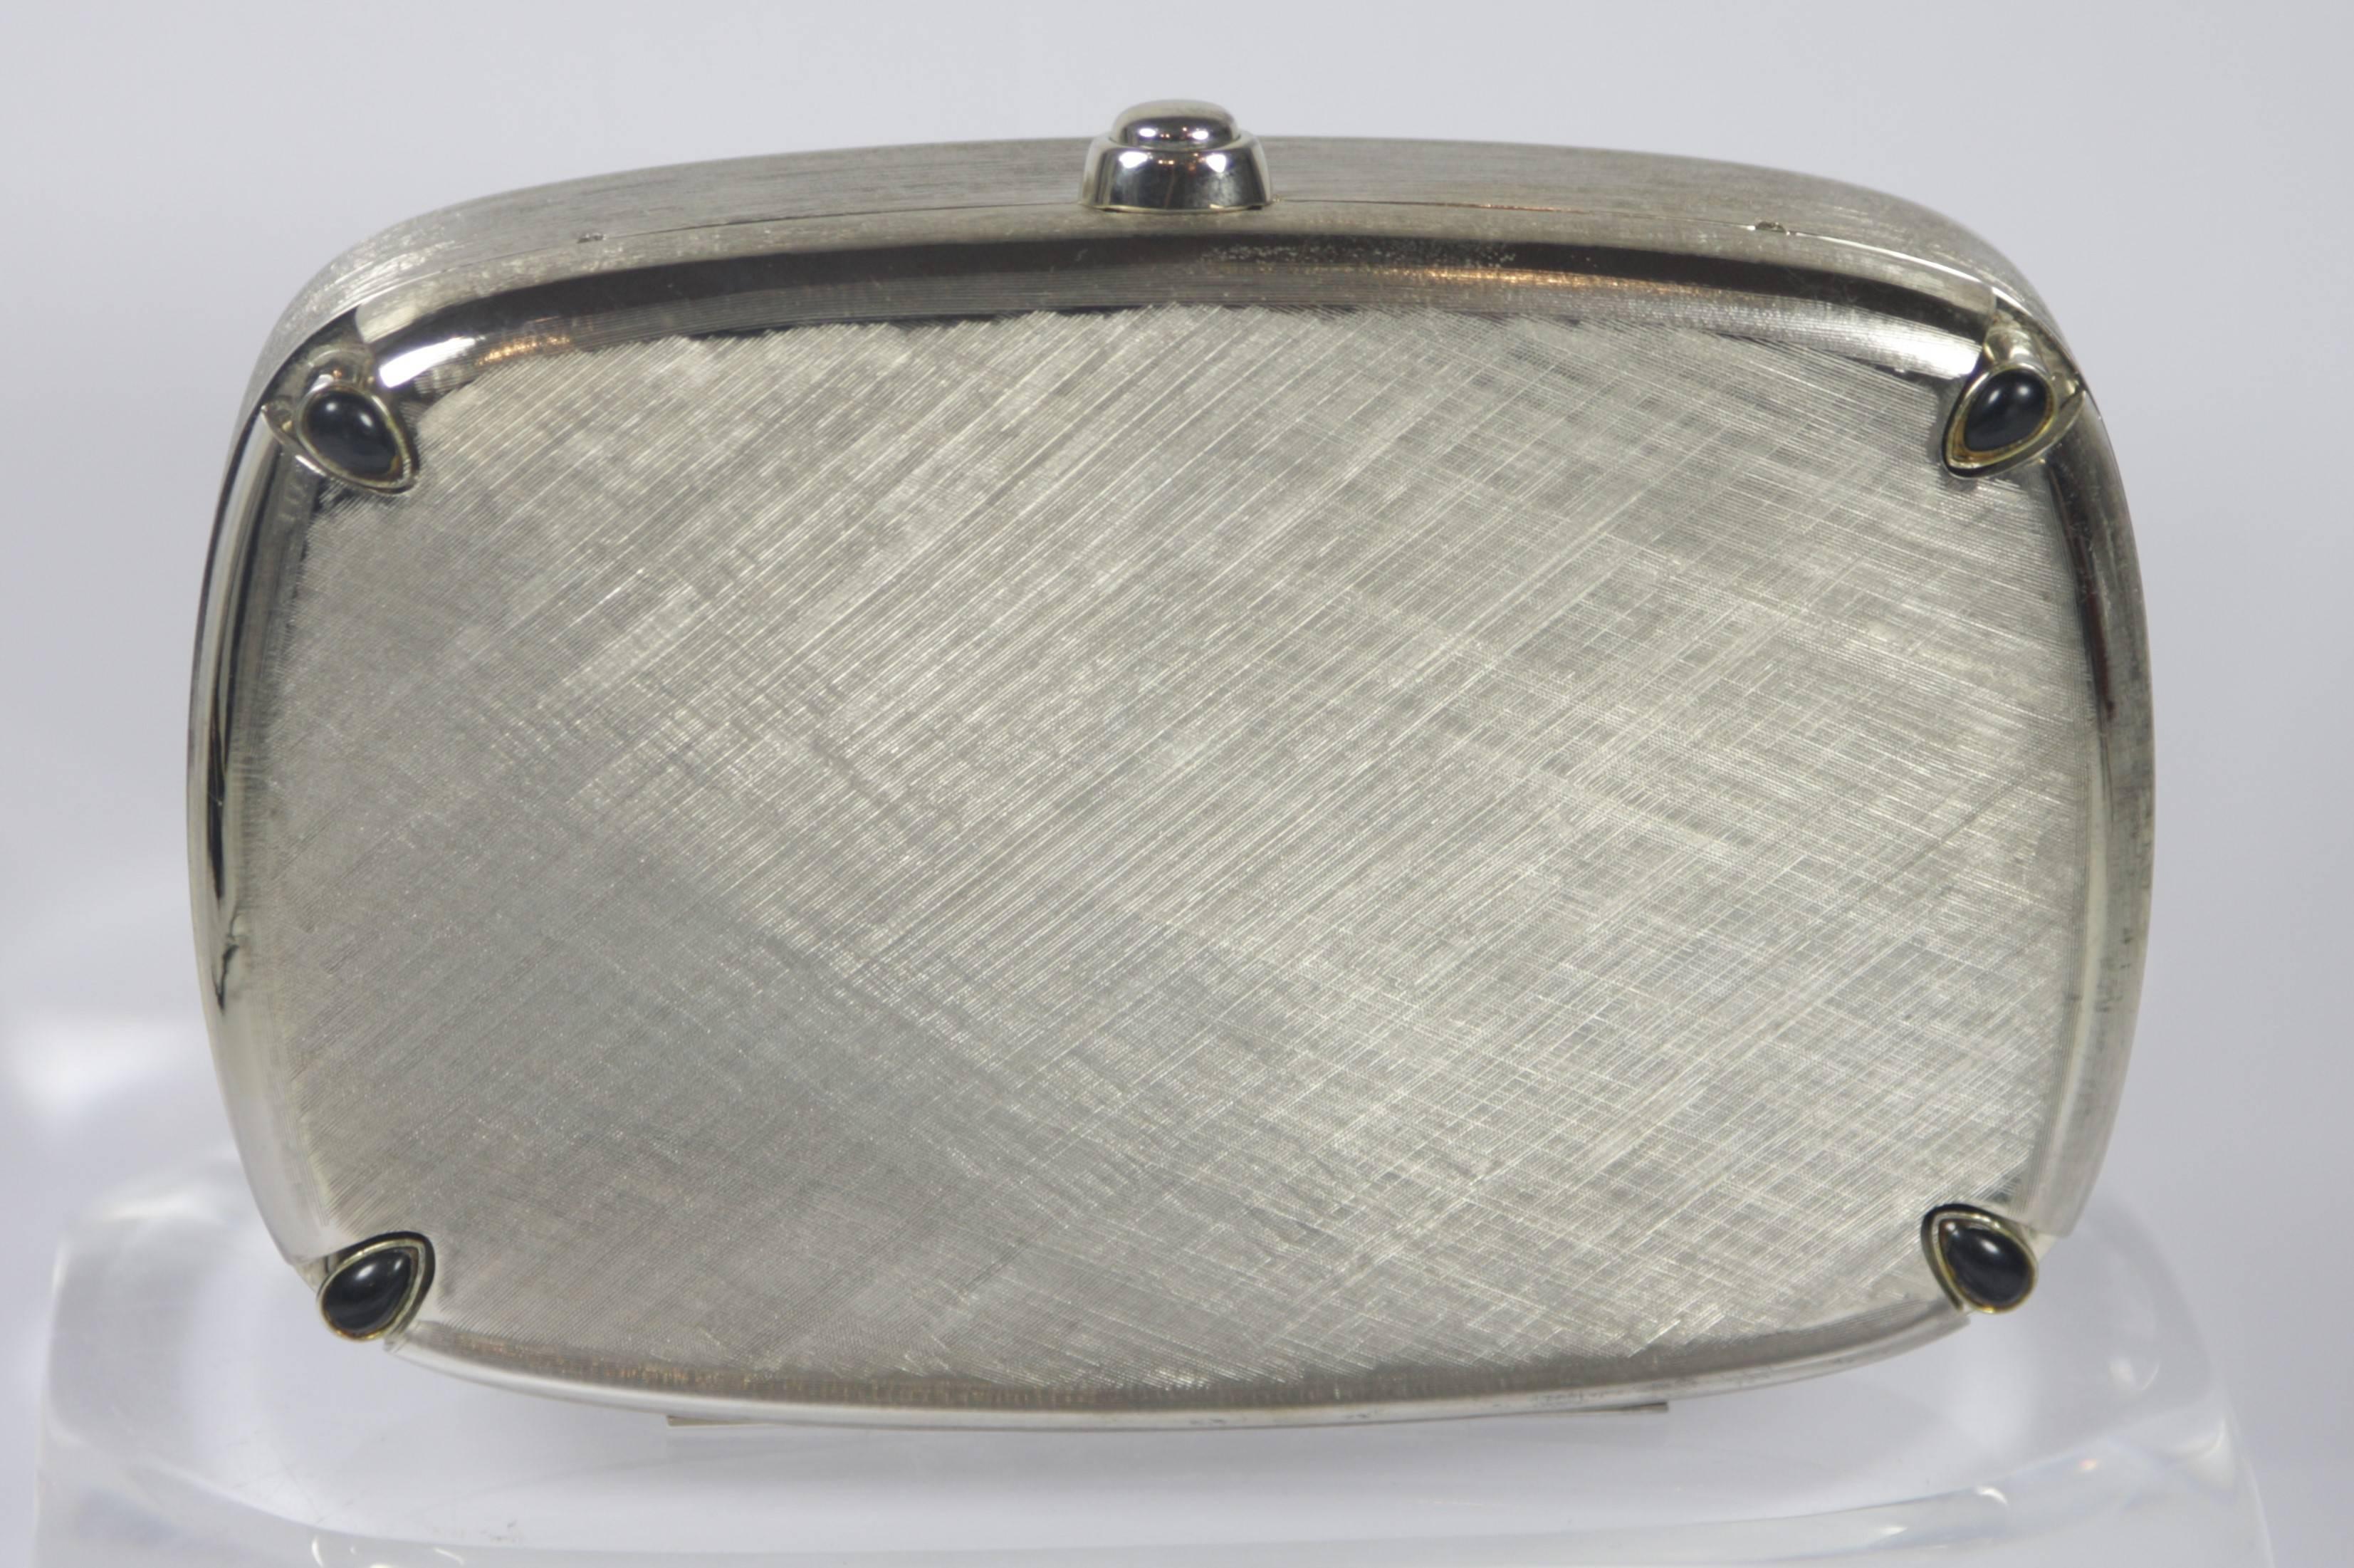 This Judith Leiber evening purse is composed of a silver tone metal with brushed detailing and stone accents at the corners. In excellent condition, comes with original comb, mirror, dust bag, and coin purse. 

**Please cross-reference